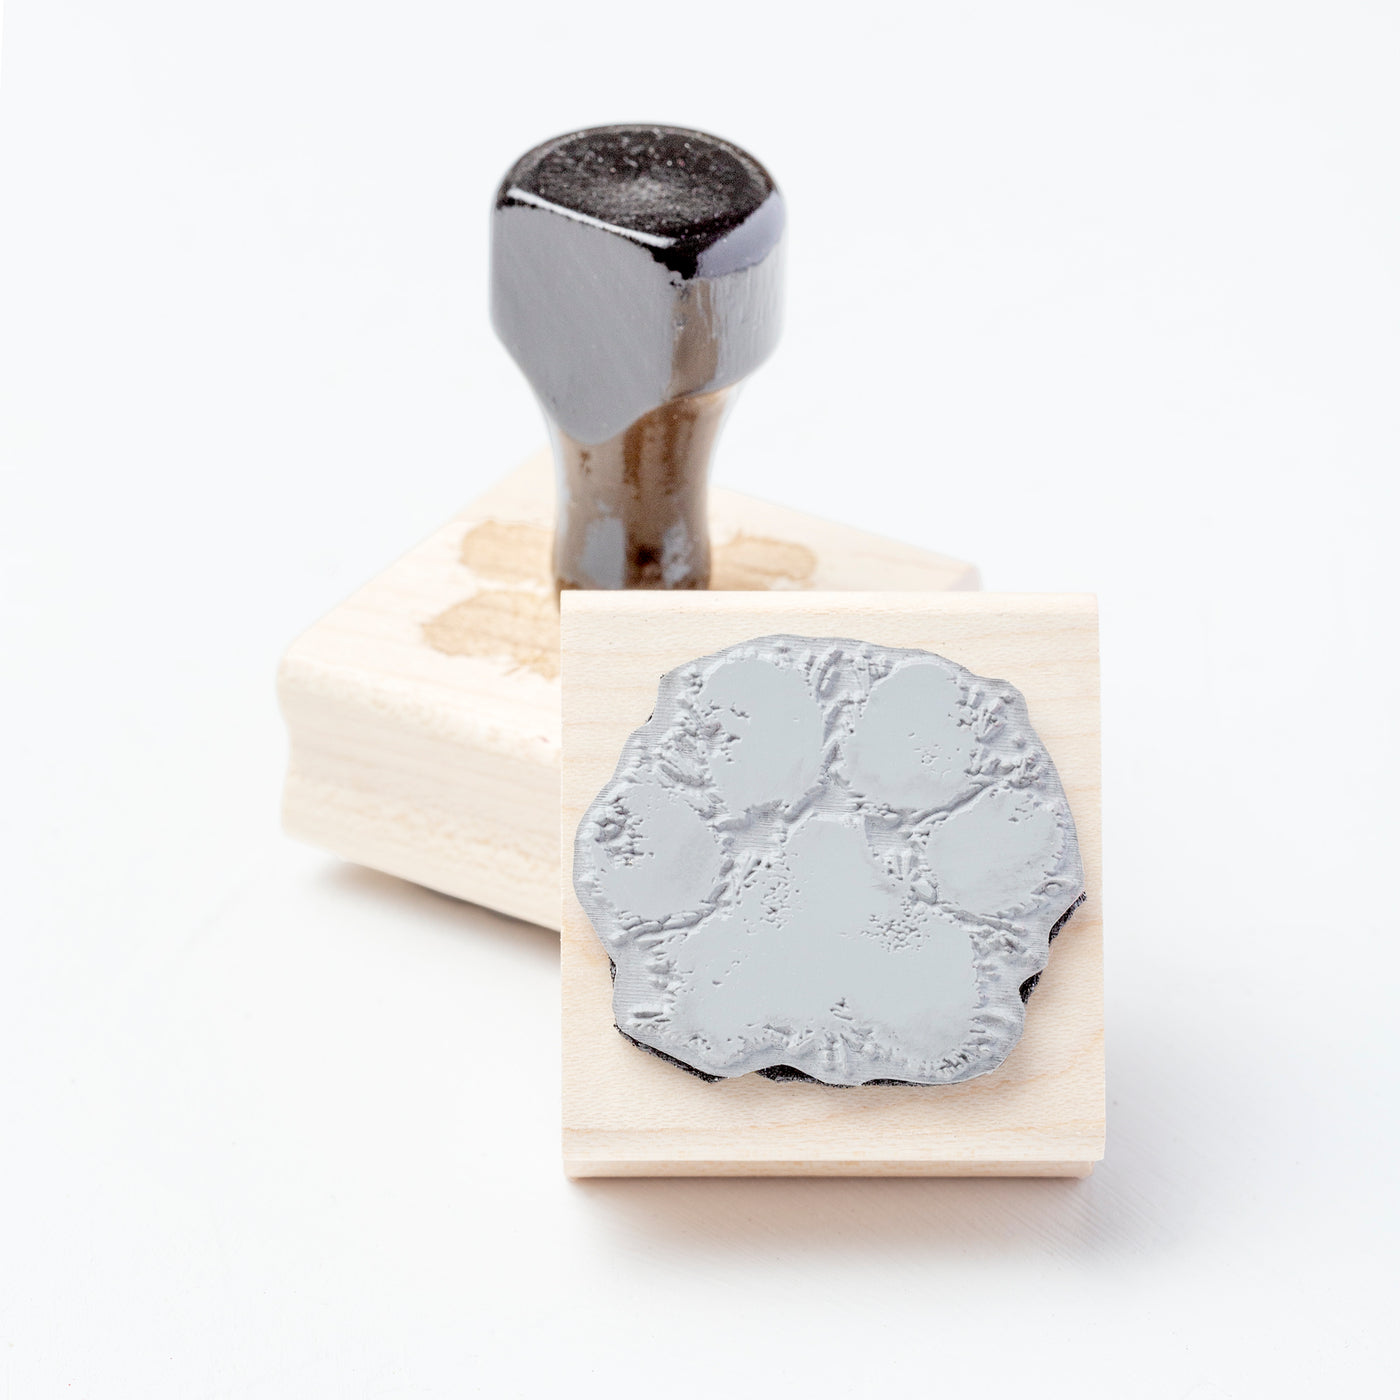 Underside of wooden rubber stamp with cat paw print